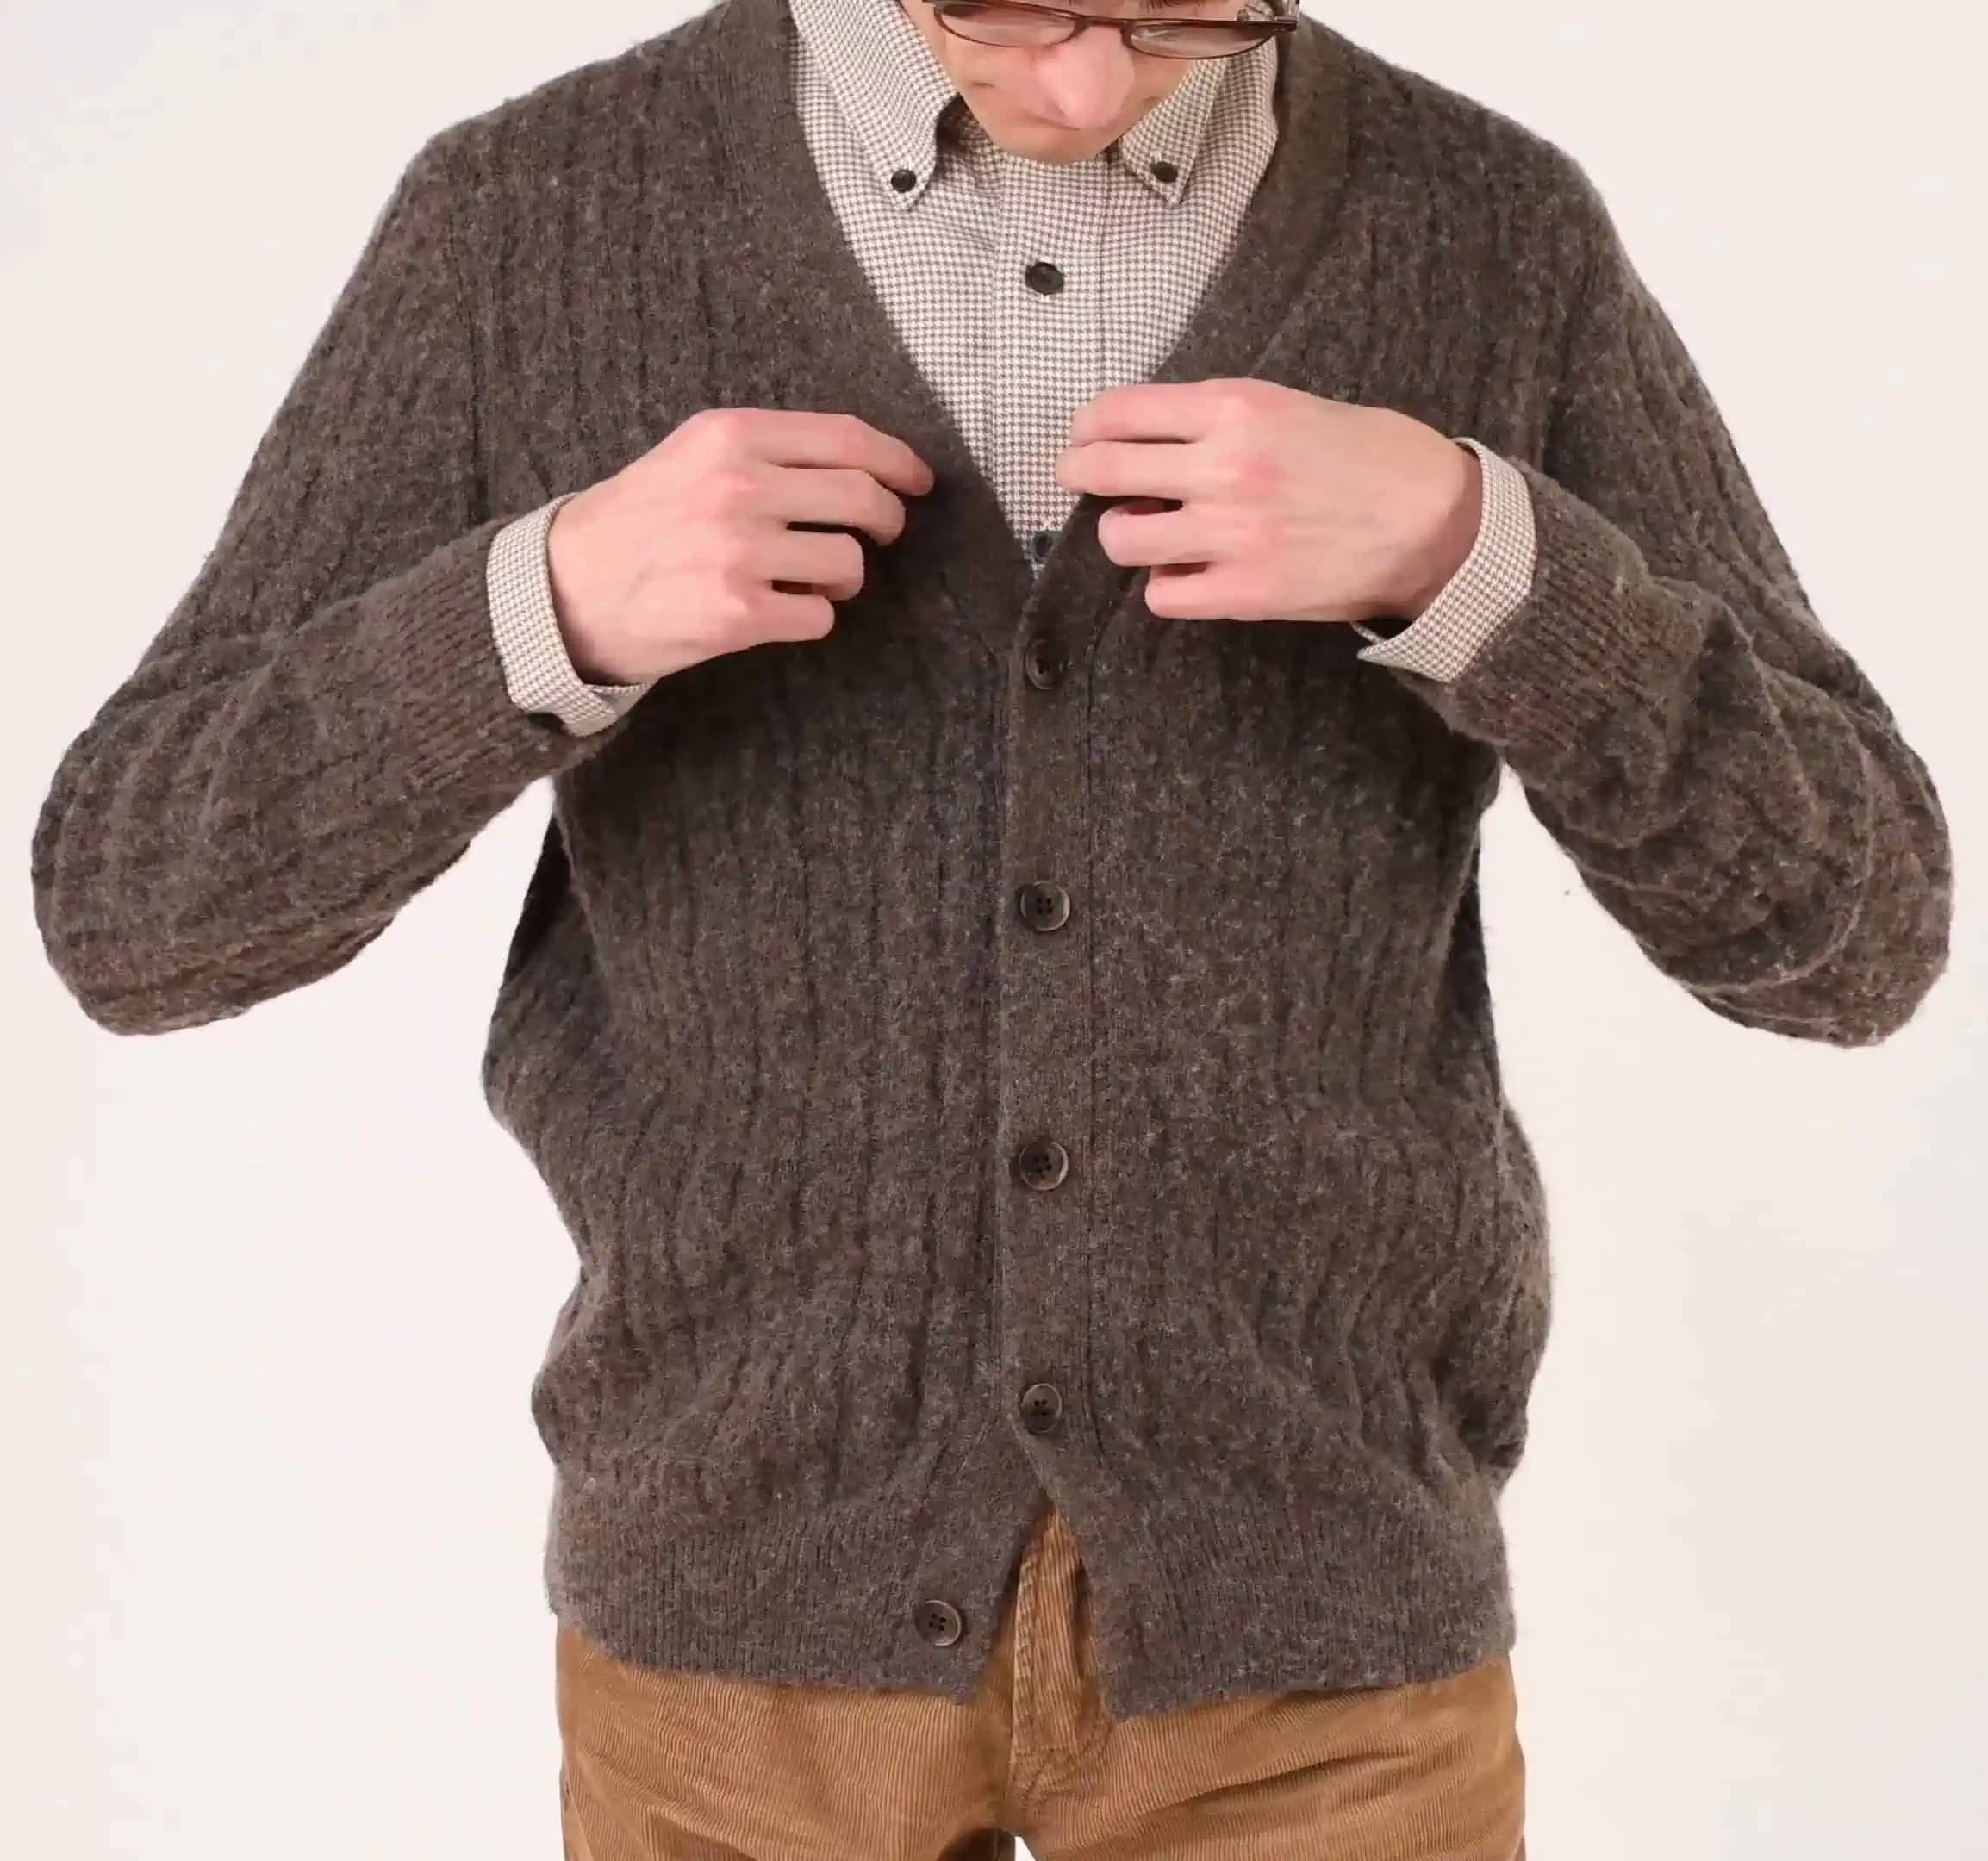 Cardigans offer you the benefit of being like an odd jacket alternative